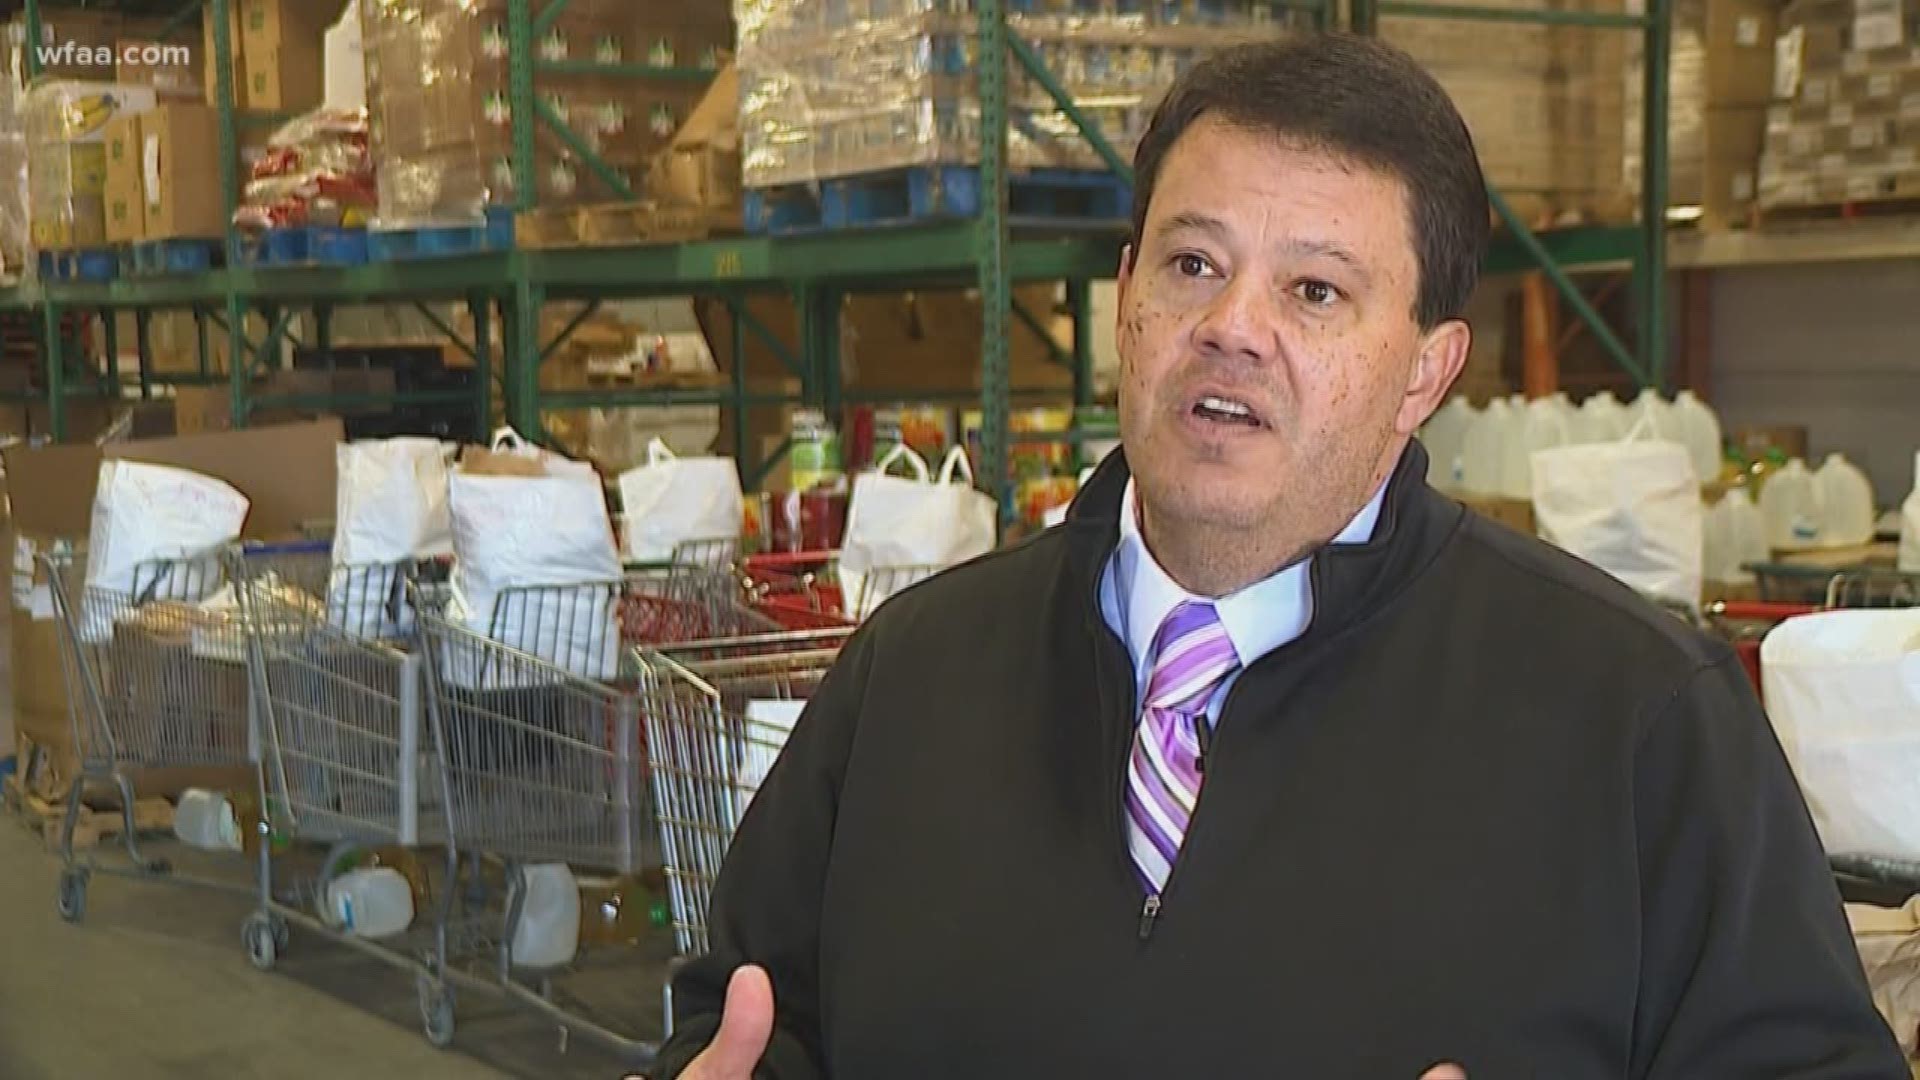 A Mansfield-area food bank calls for North Texas food banks and pantries to work together to help struggling families impacted by the government shutdown.